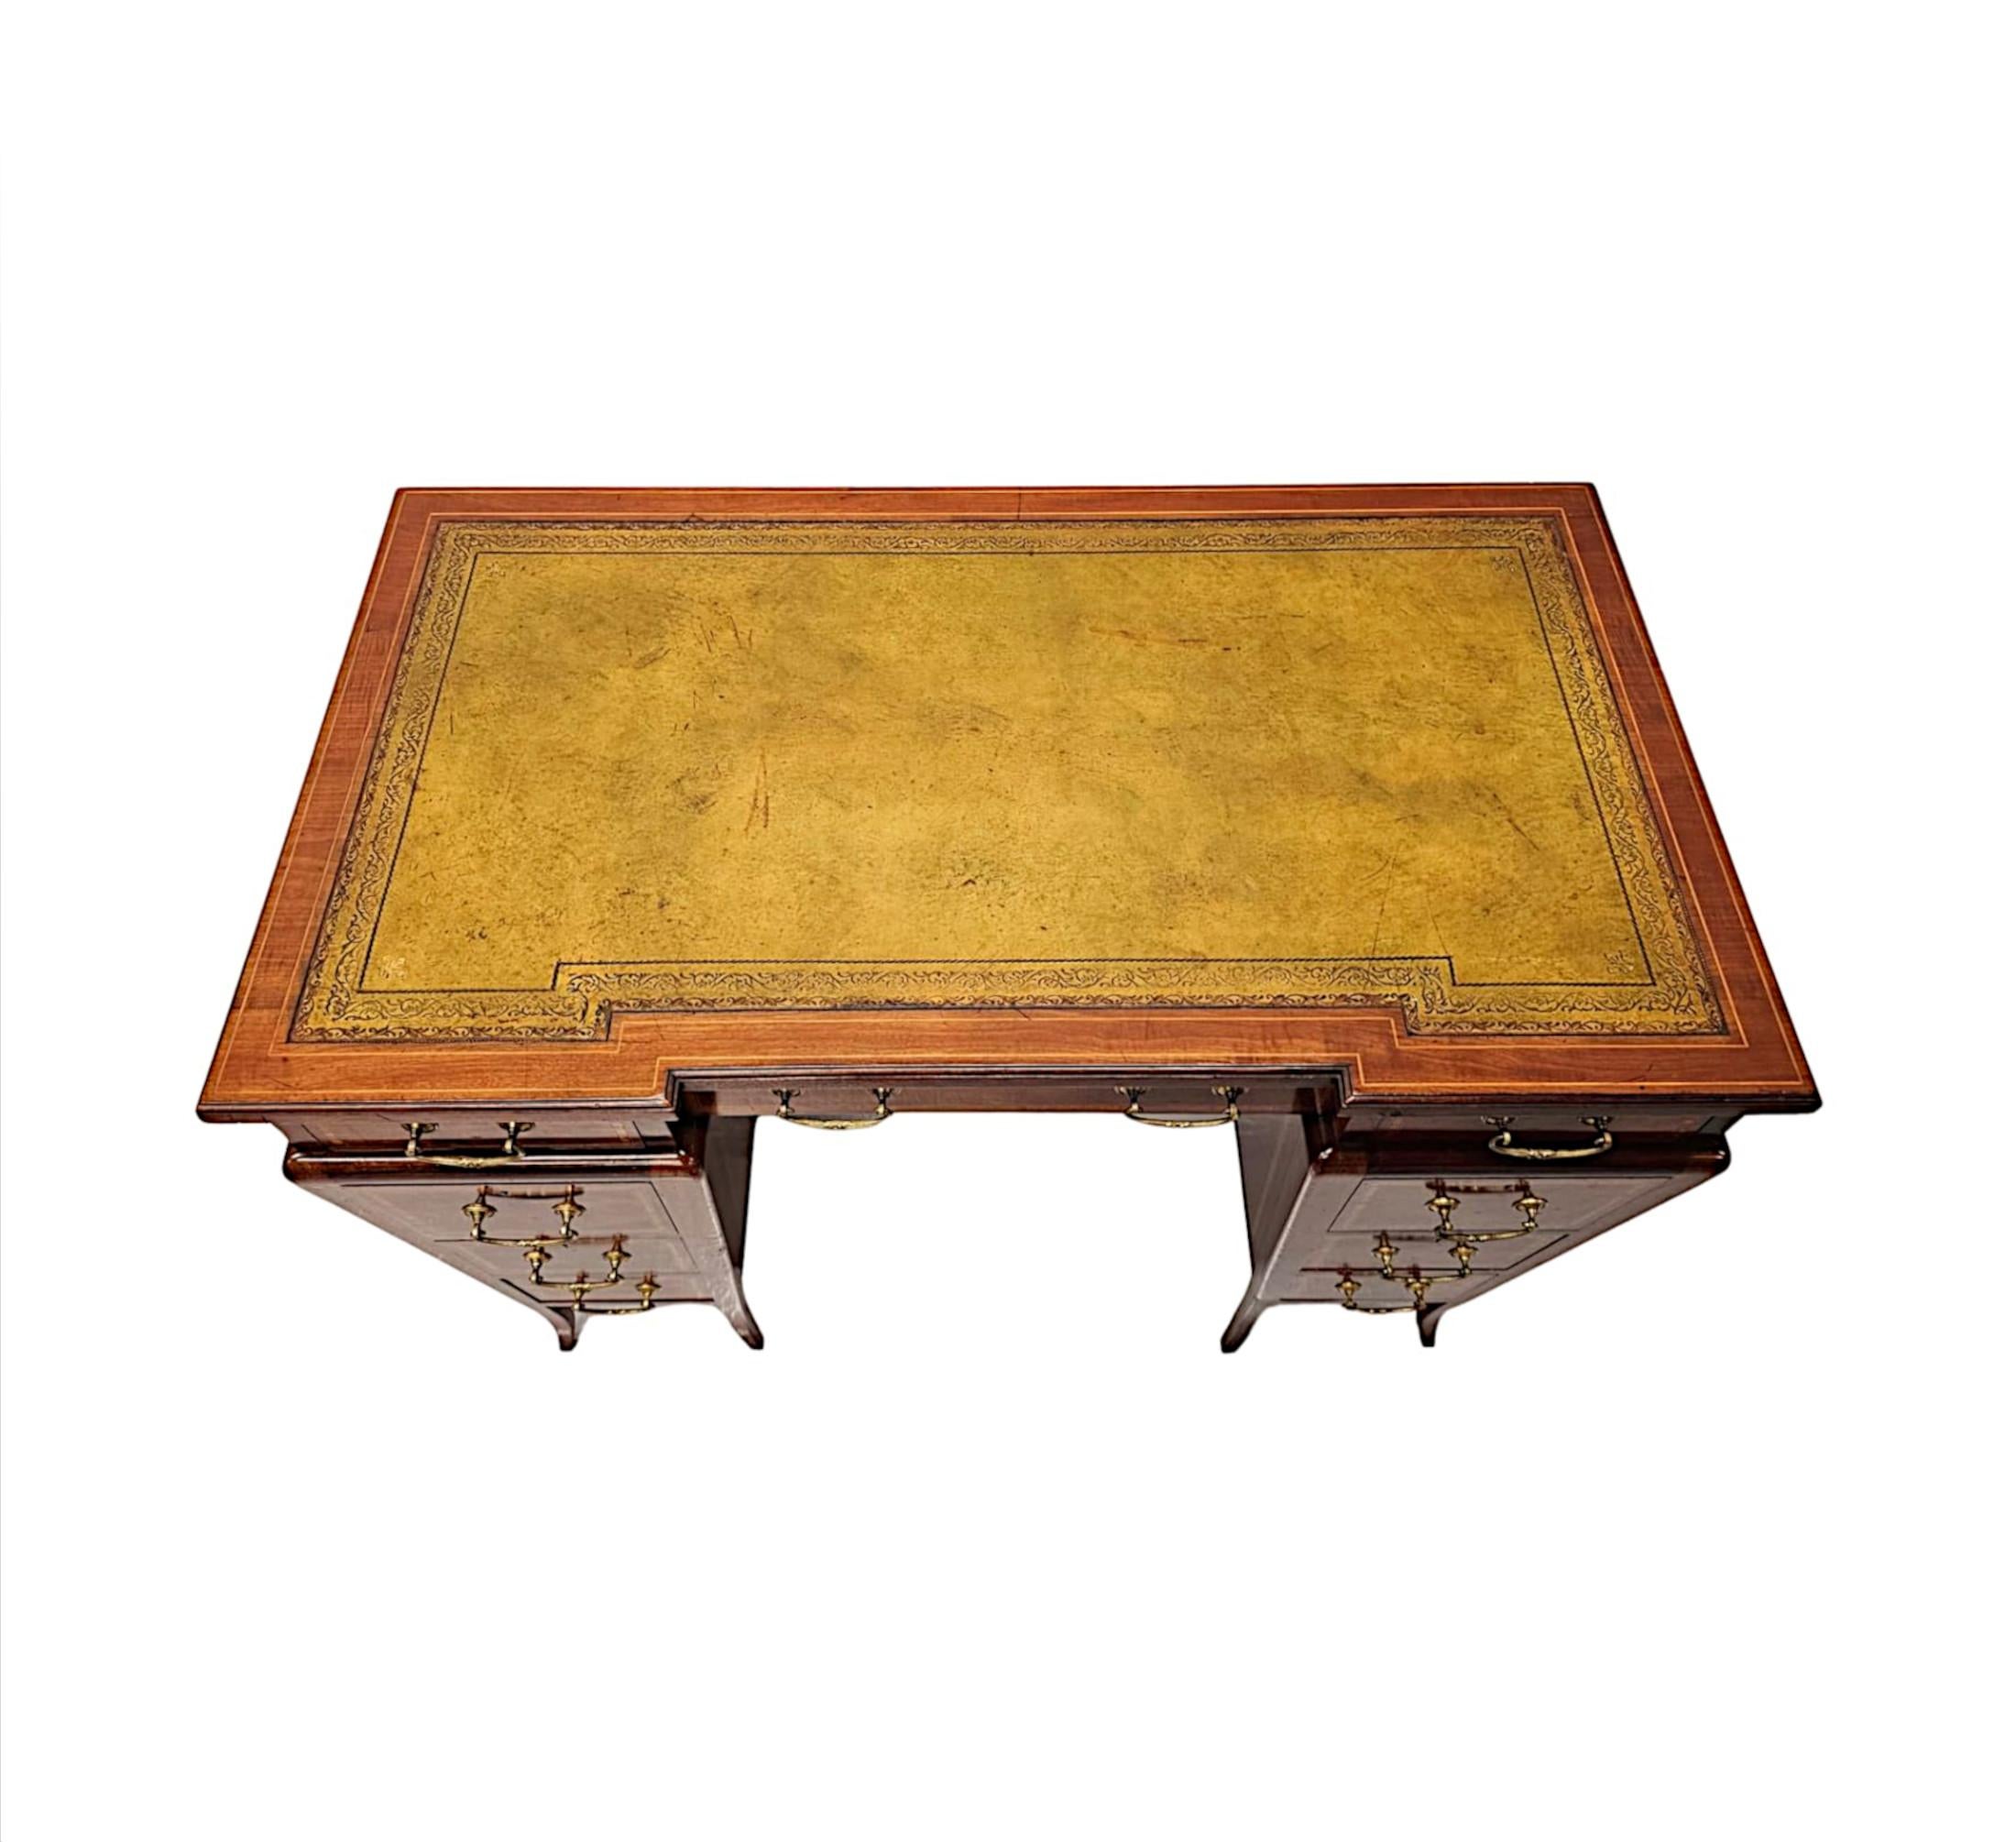 English A Stunning Edwardian Leather Top Desk after Edward and Roberts For Sale